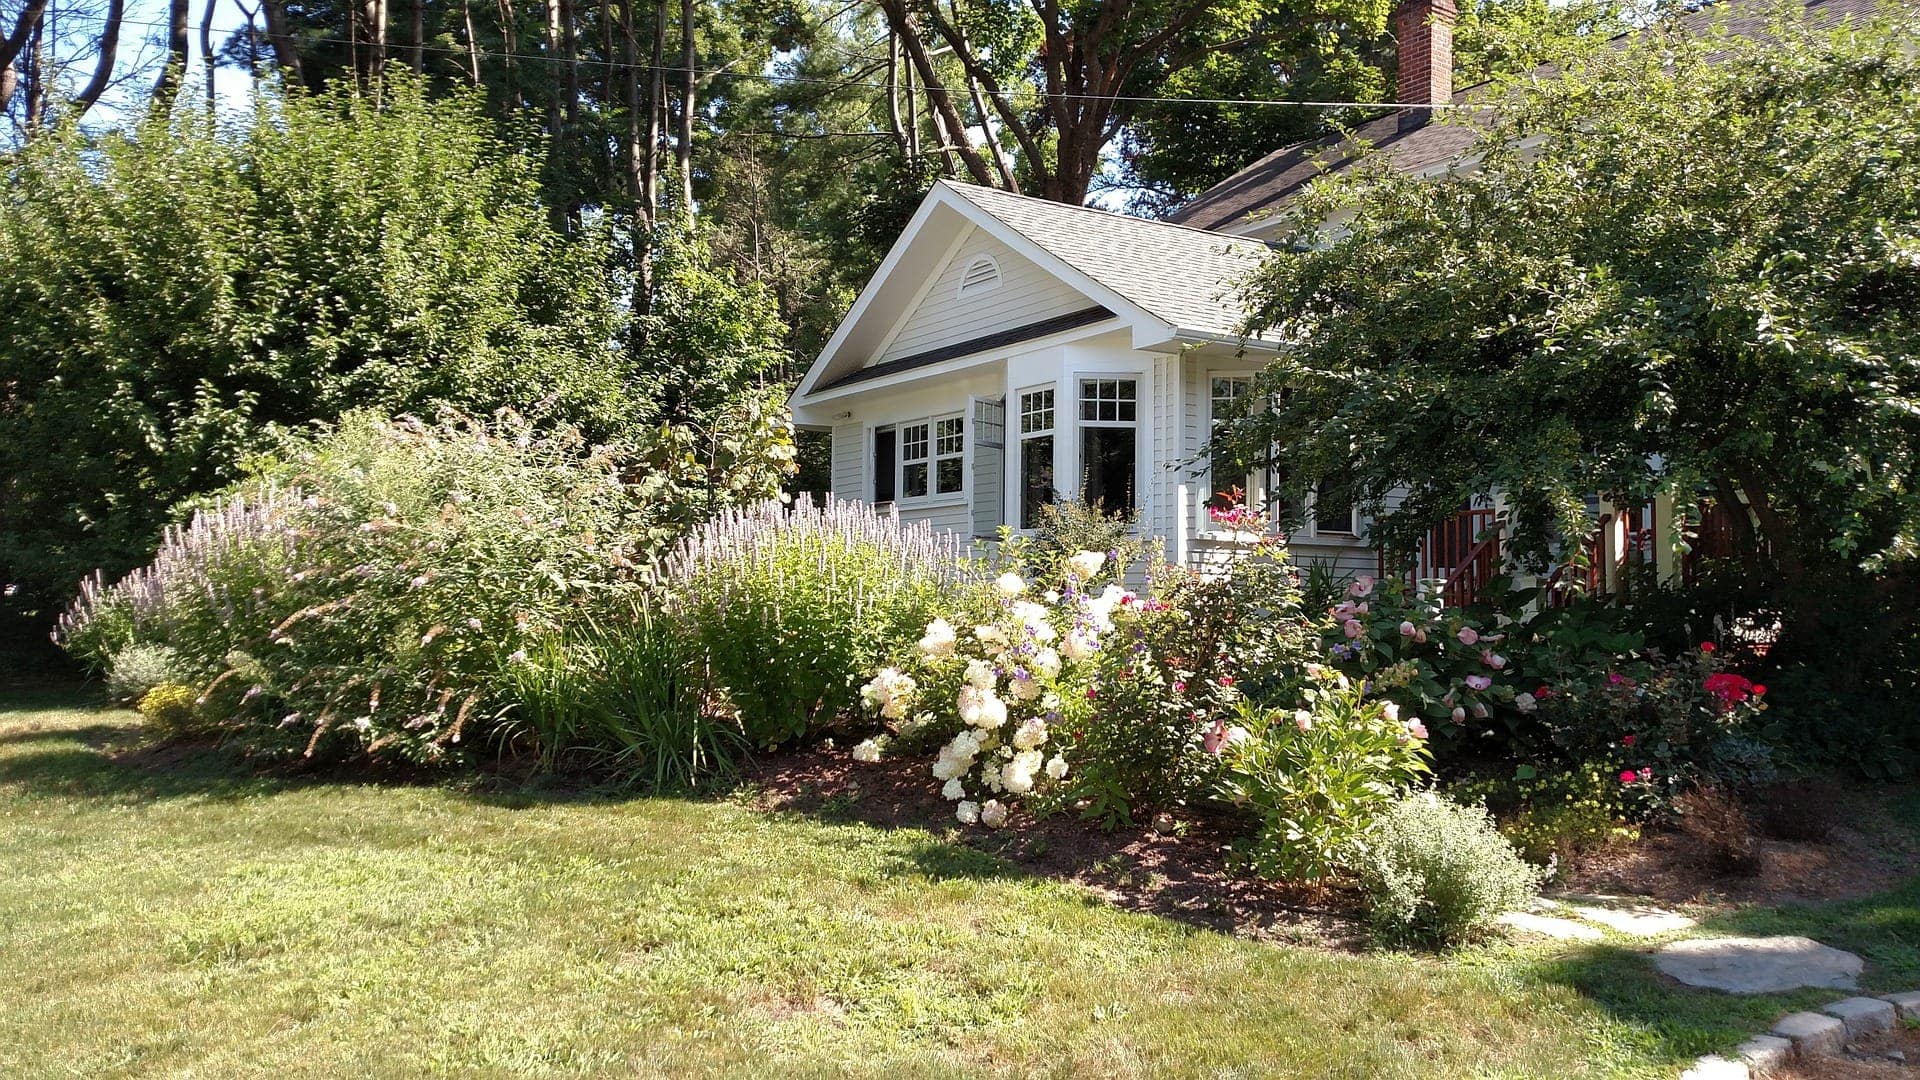 14 Mix and Match Bushes for a Unique Hedge Row